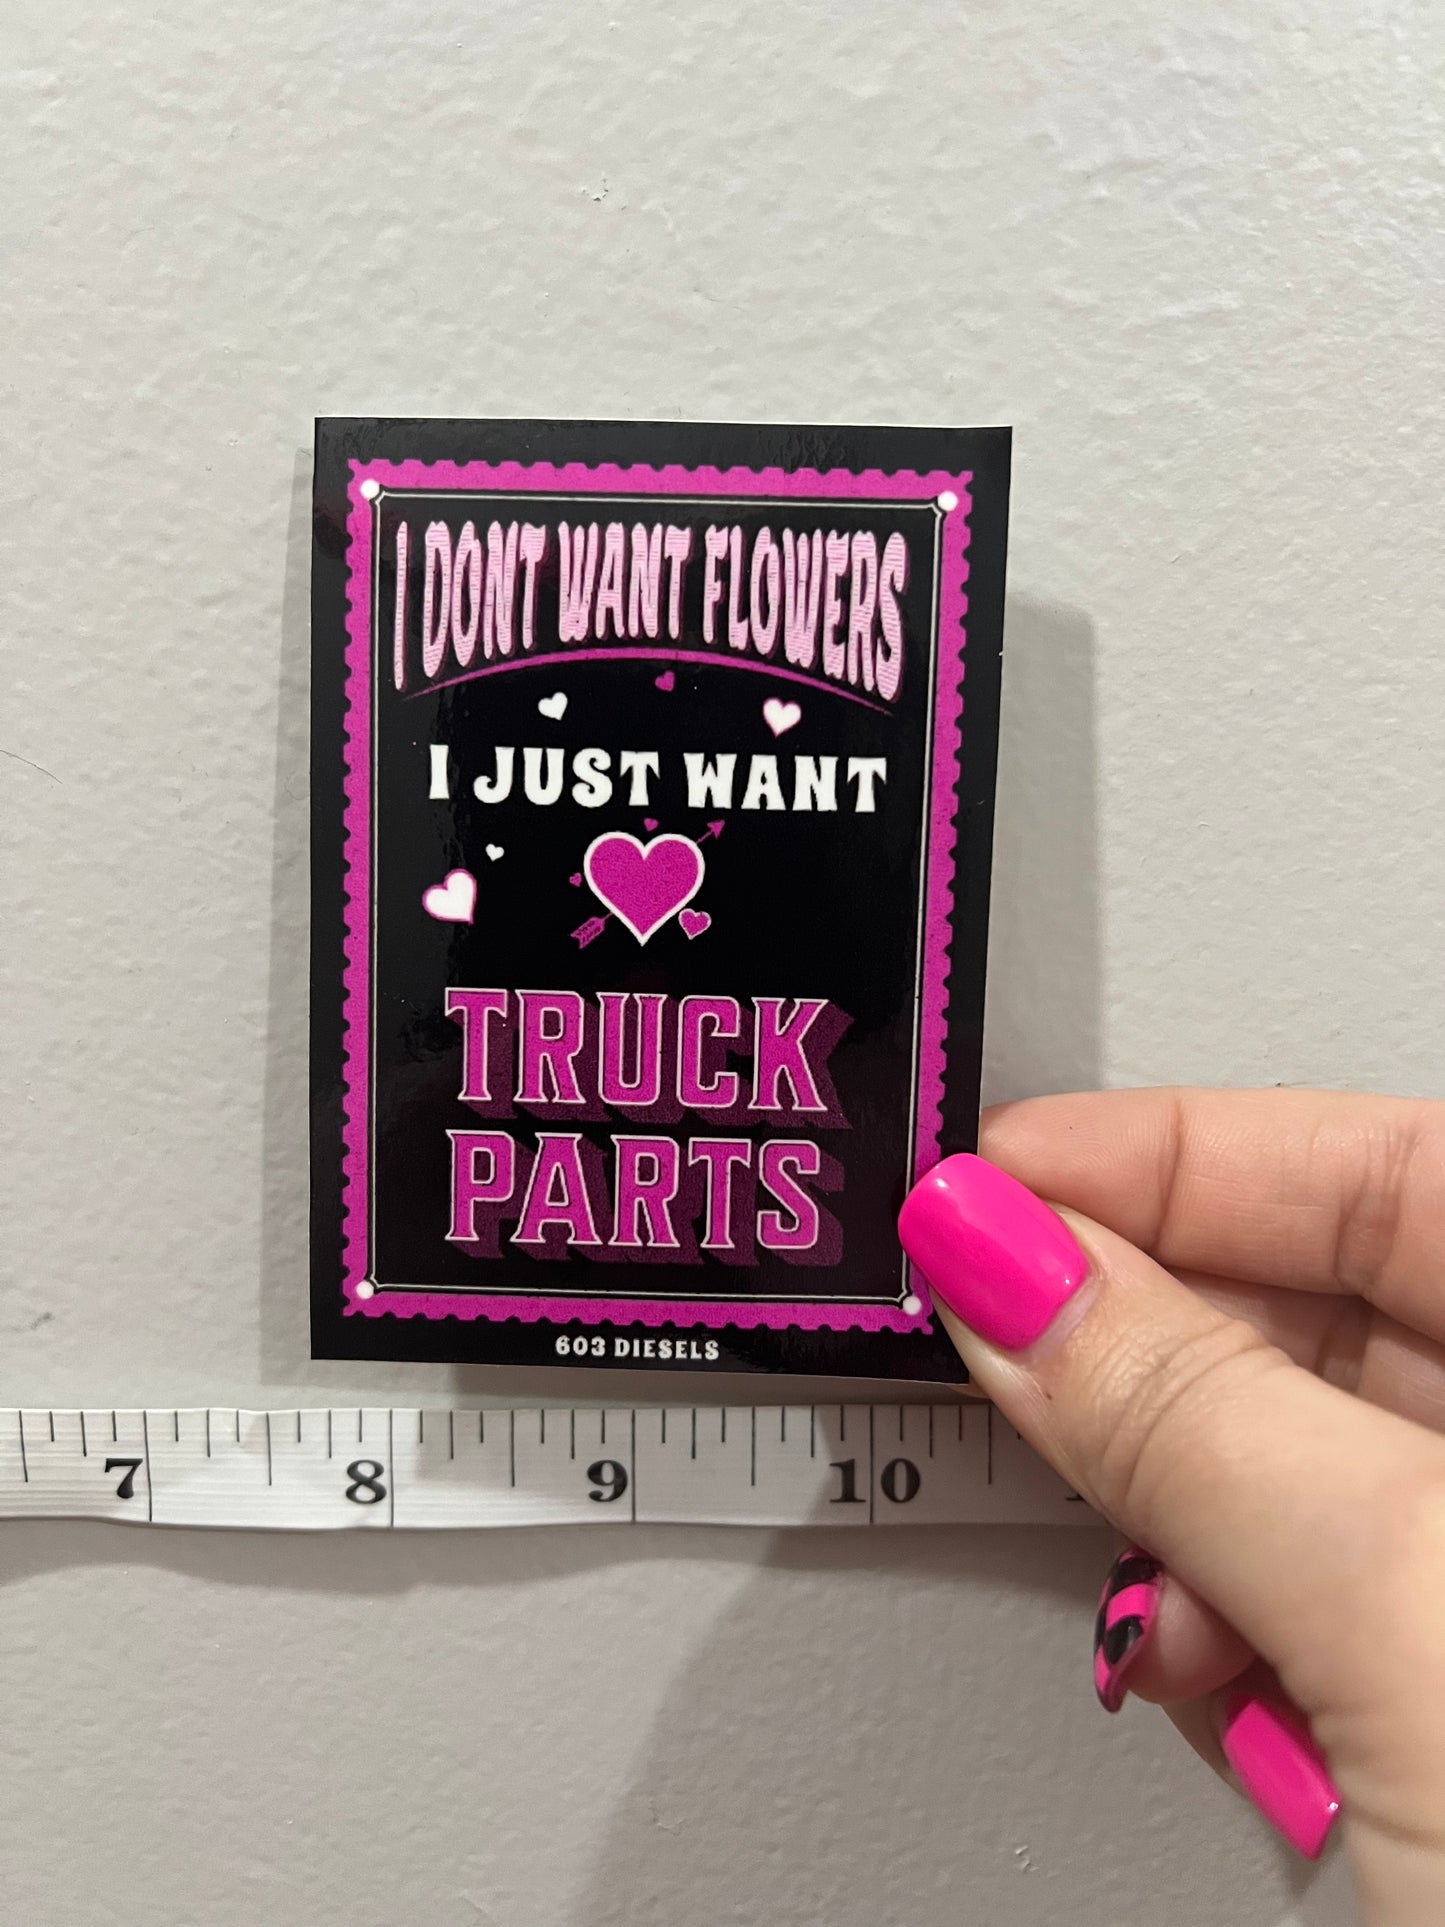 I don't want flowers sticker